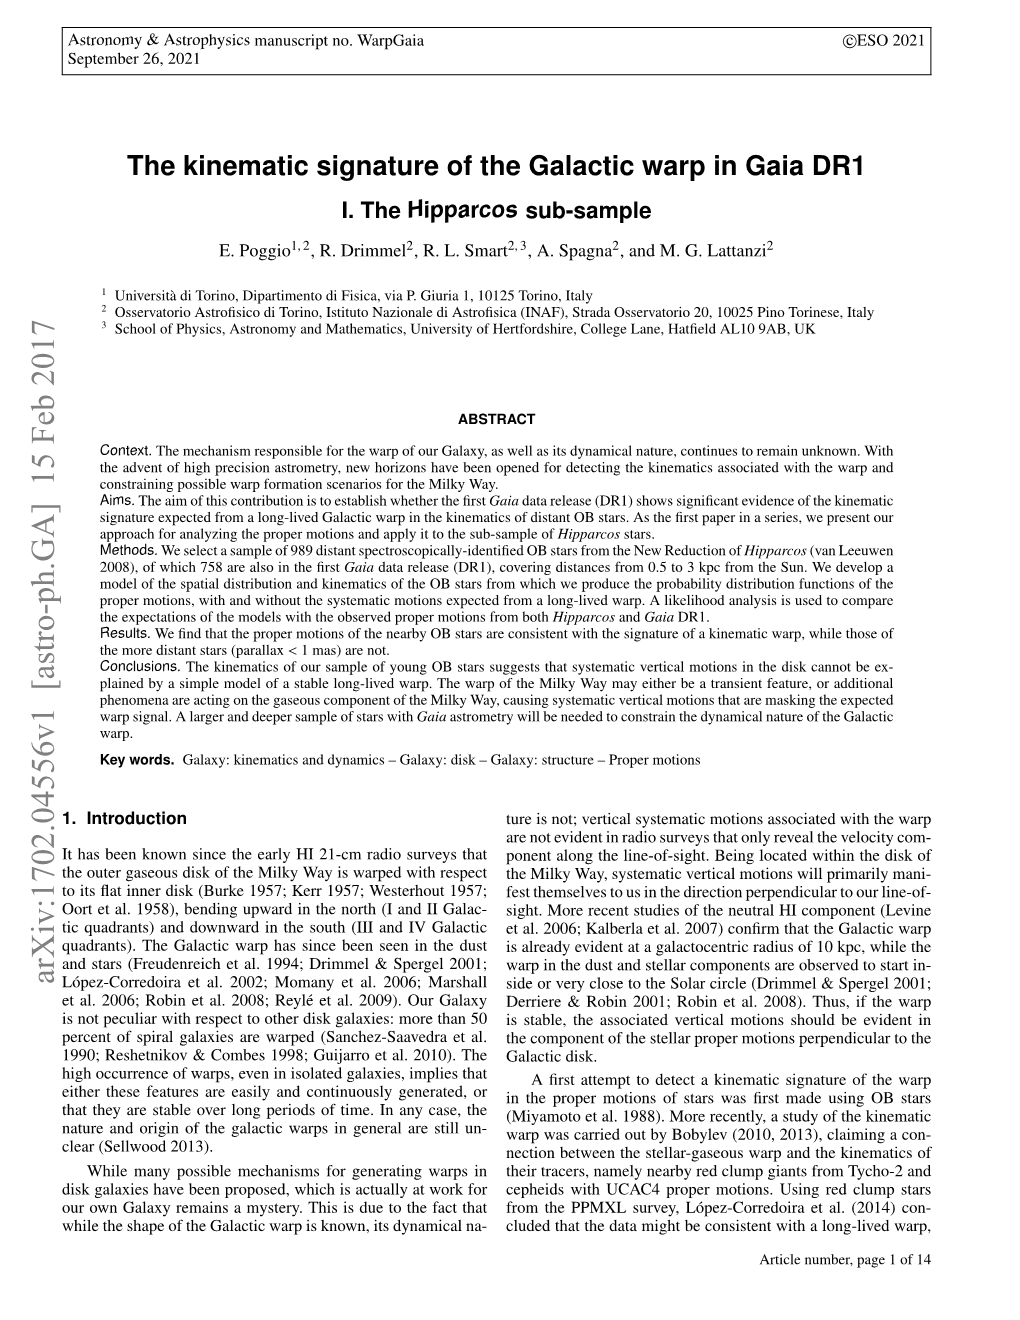 The Kinematic Signature of the Galactic Warp in Gaia DR1-I. the Hipparcos Subsample